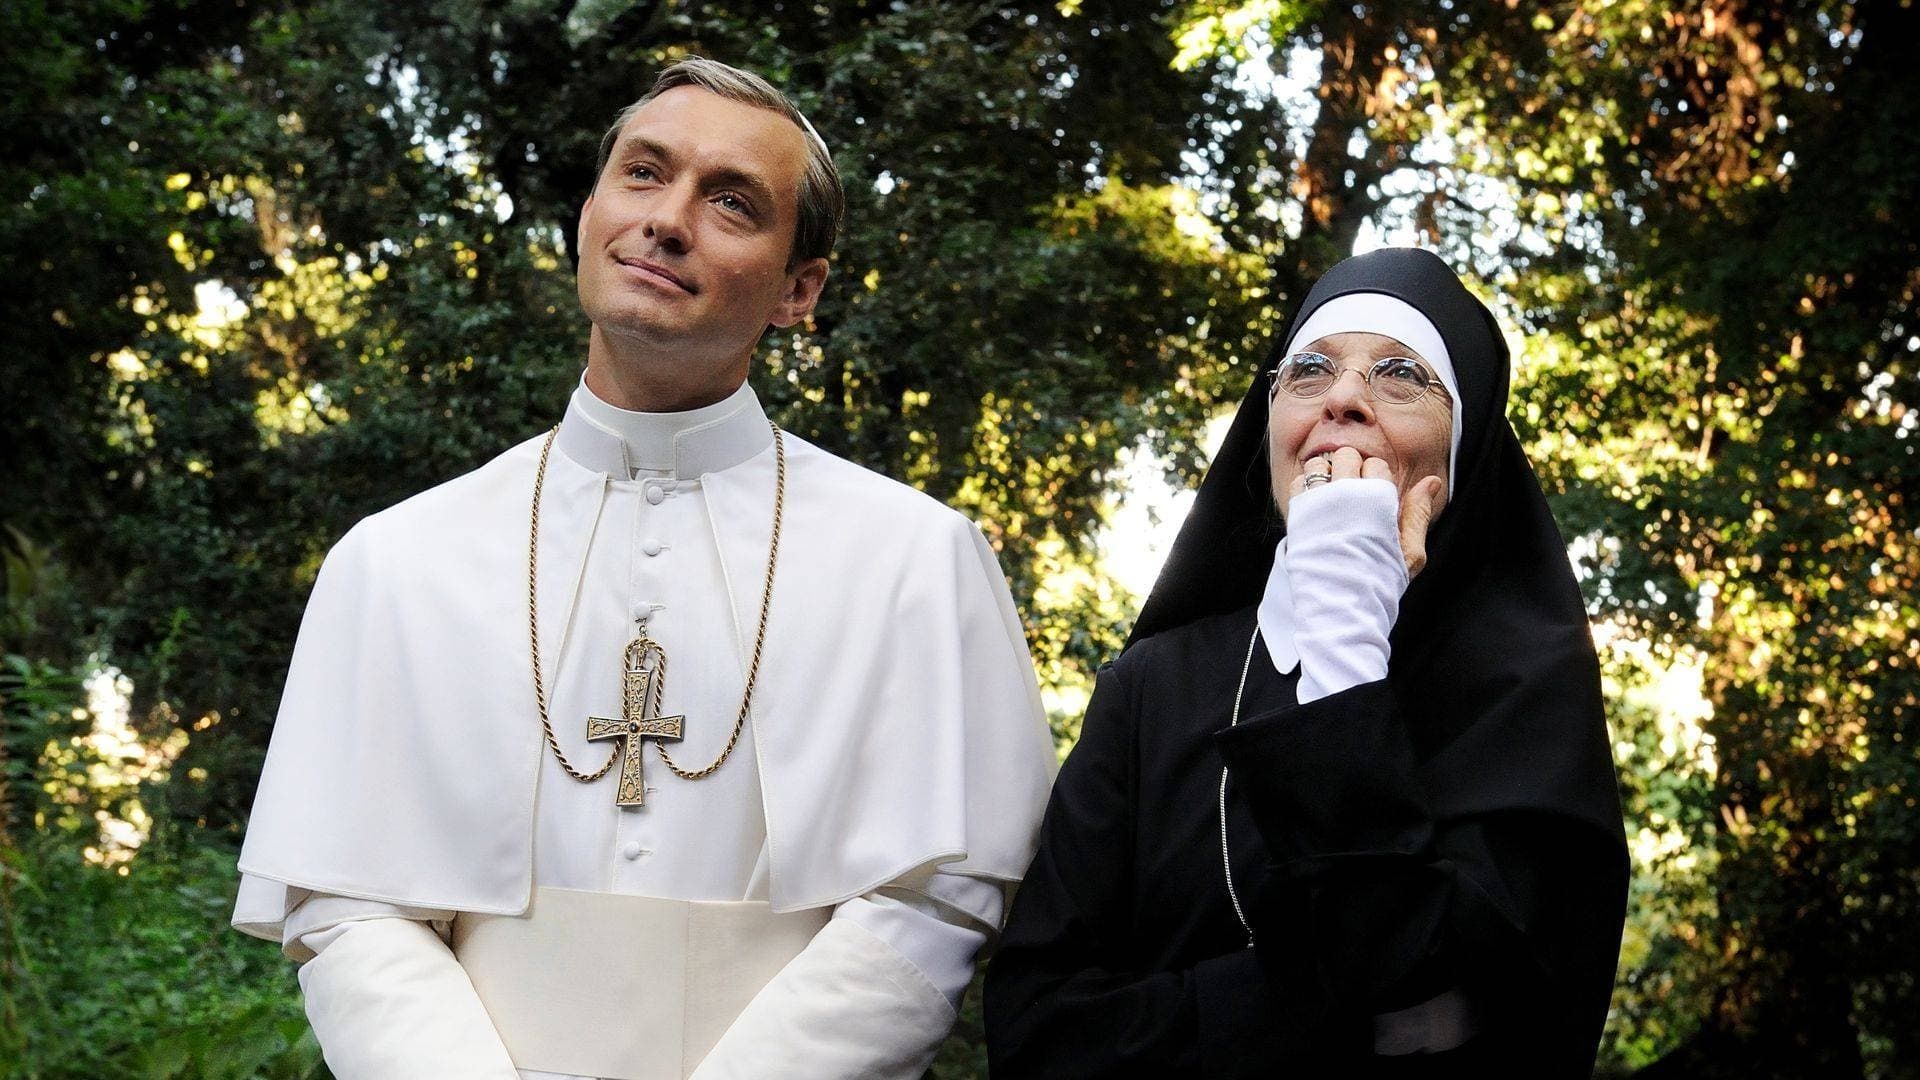 The Young Pope background